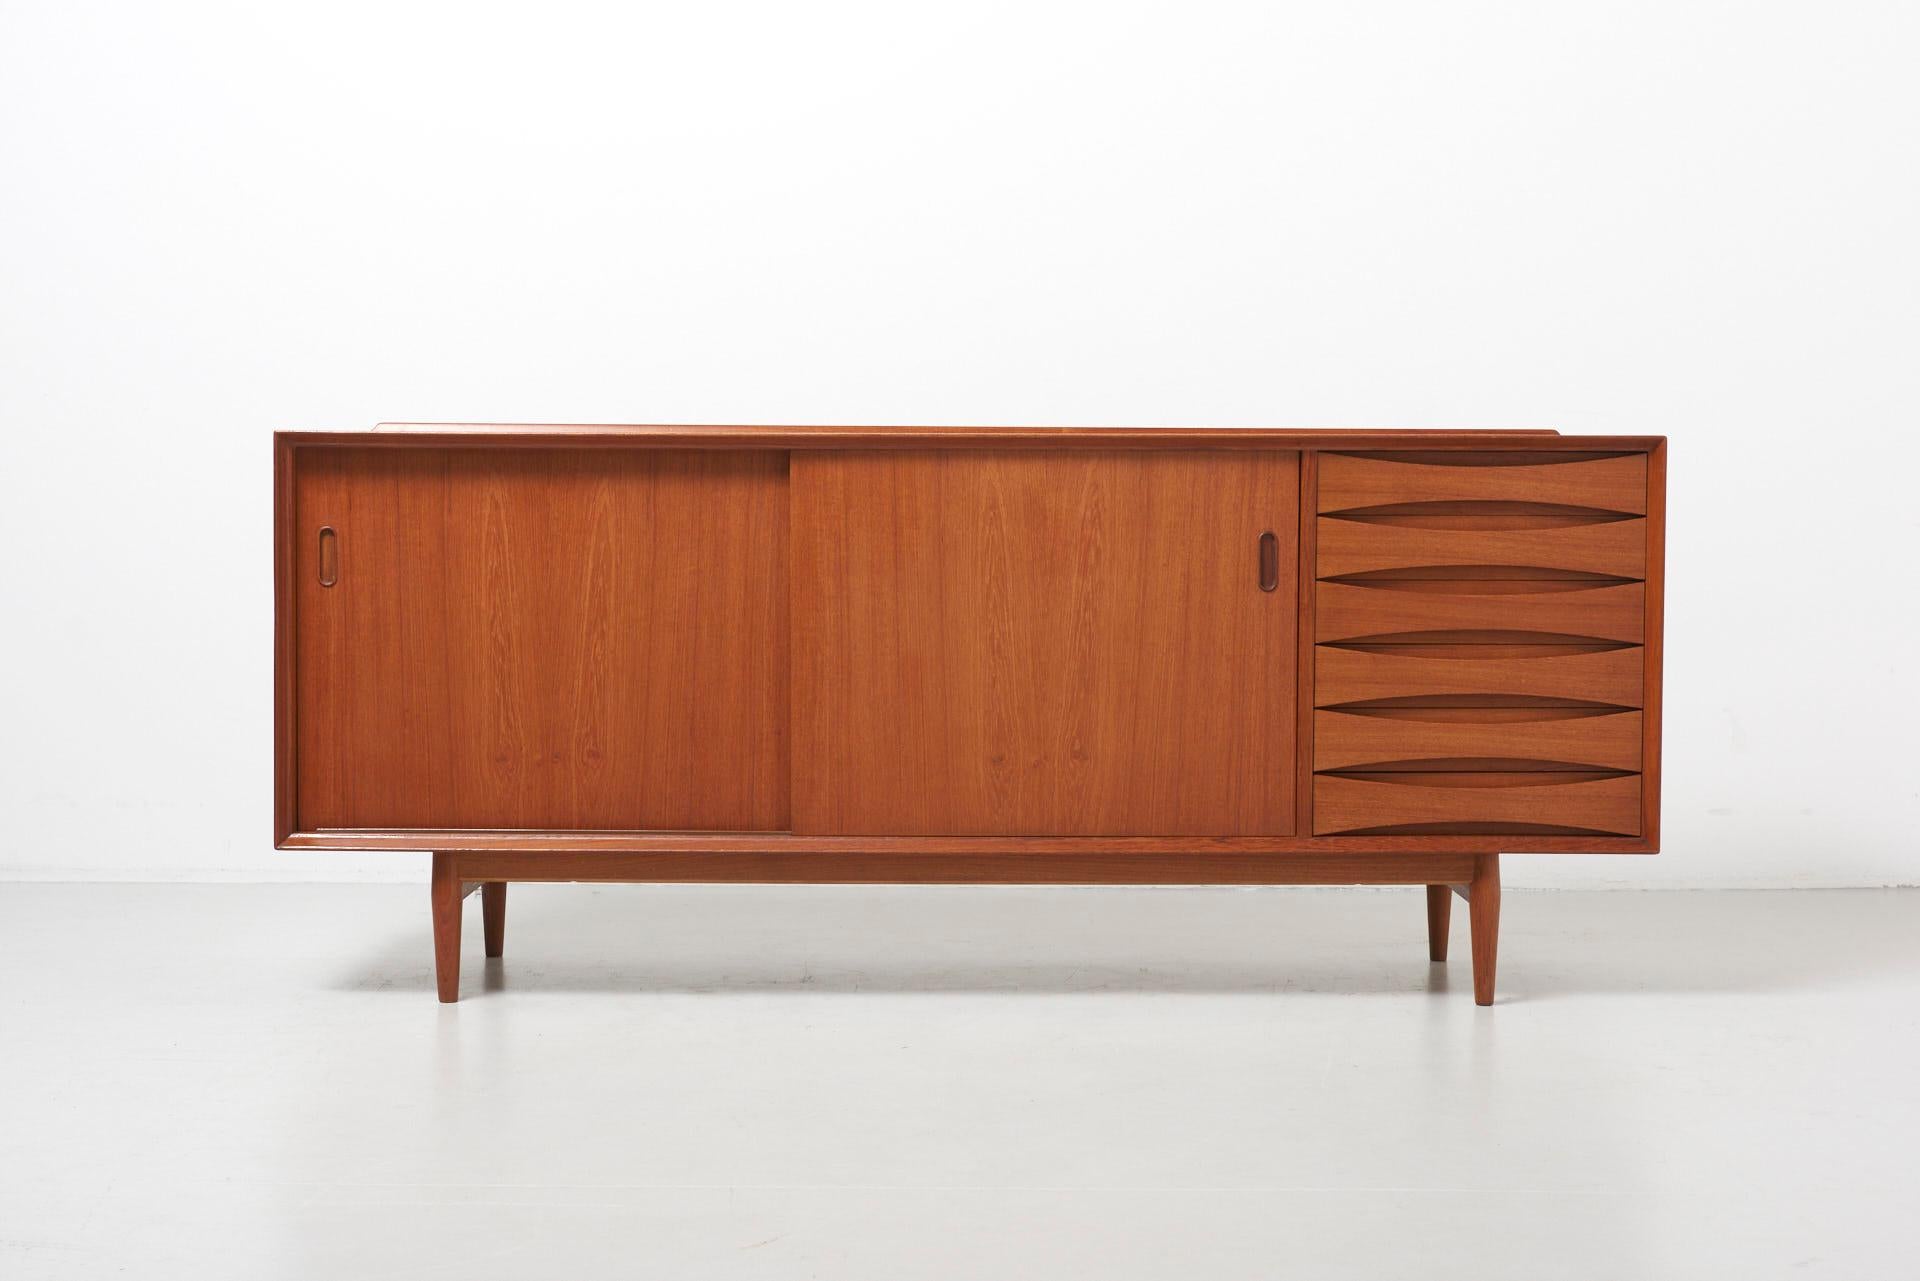 Sideboard in teak with 2 reversible sliding doors (black or teak), designed by Arne Vodder for Sibast Furniture. Features the typical raised edge and curved drawers, both a signature of the designer.
Made in Denmark.